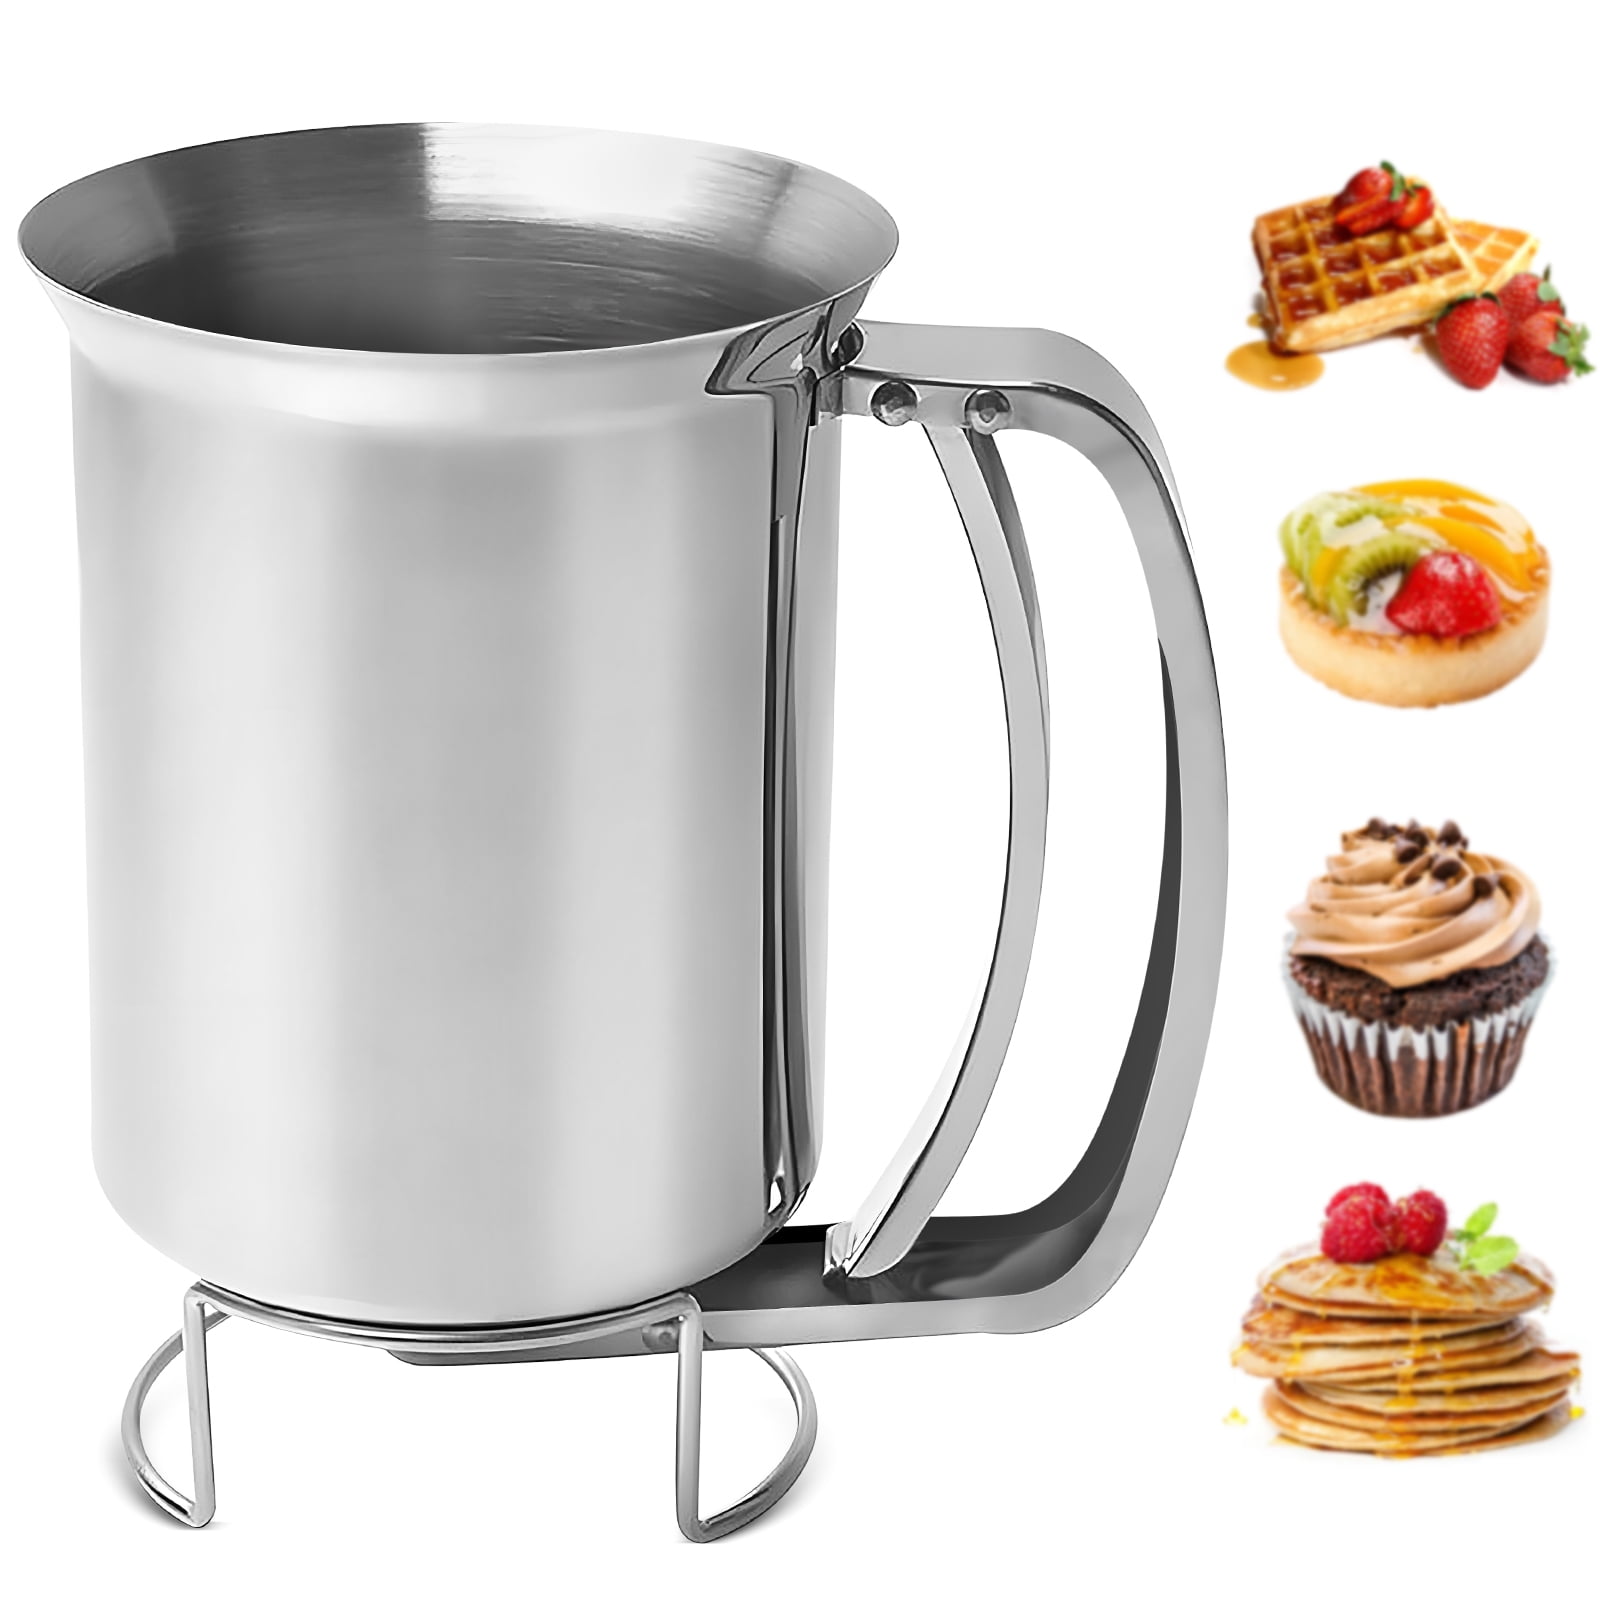 Houzemann 2-in-1 Pancake/Batter/Cupcake Dispenser-Perfect Baking Tool with Squeeze Handle for Cupcakes,Pancakes,Muffins,Crepes,Cakes,Waffles and Any